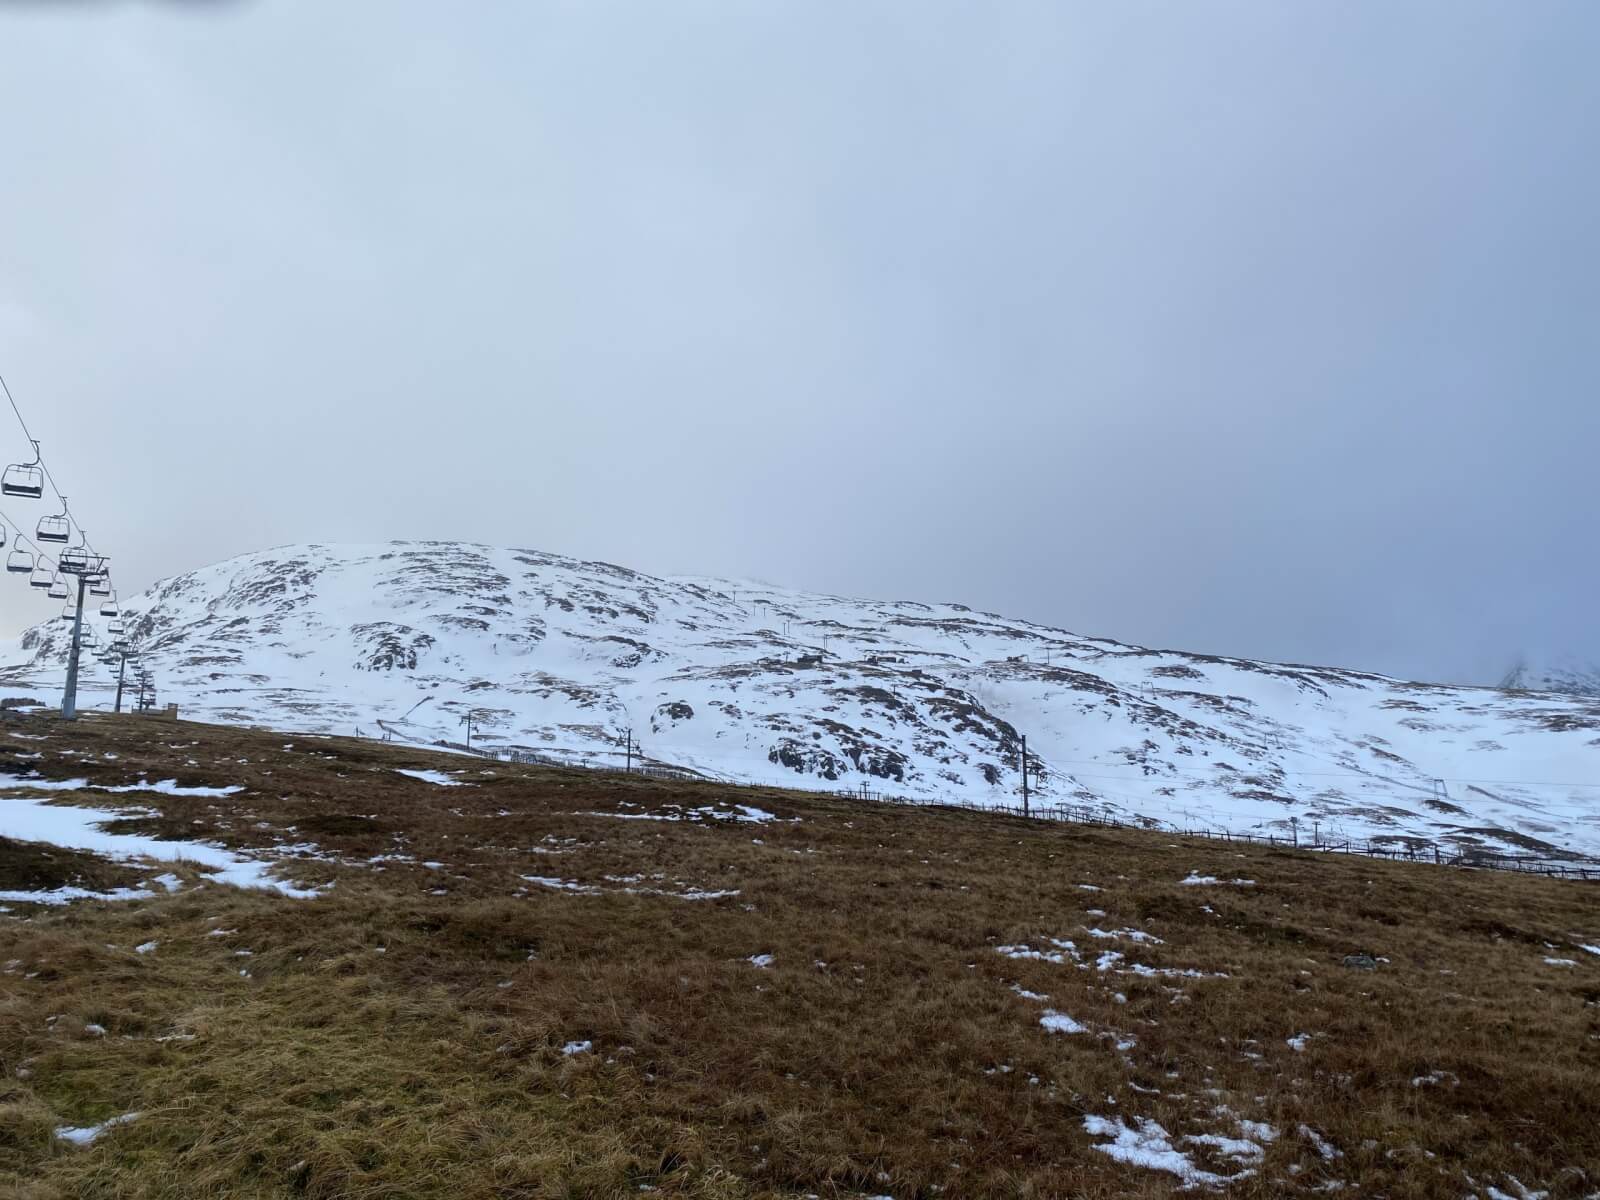 Looking up to the upper ski area on Meall a Bhuiridh.